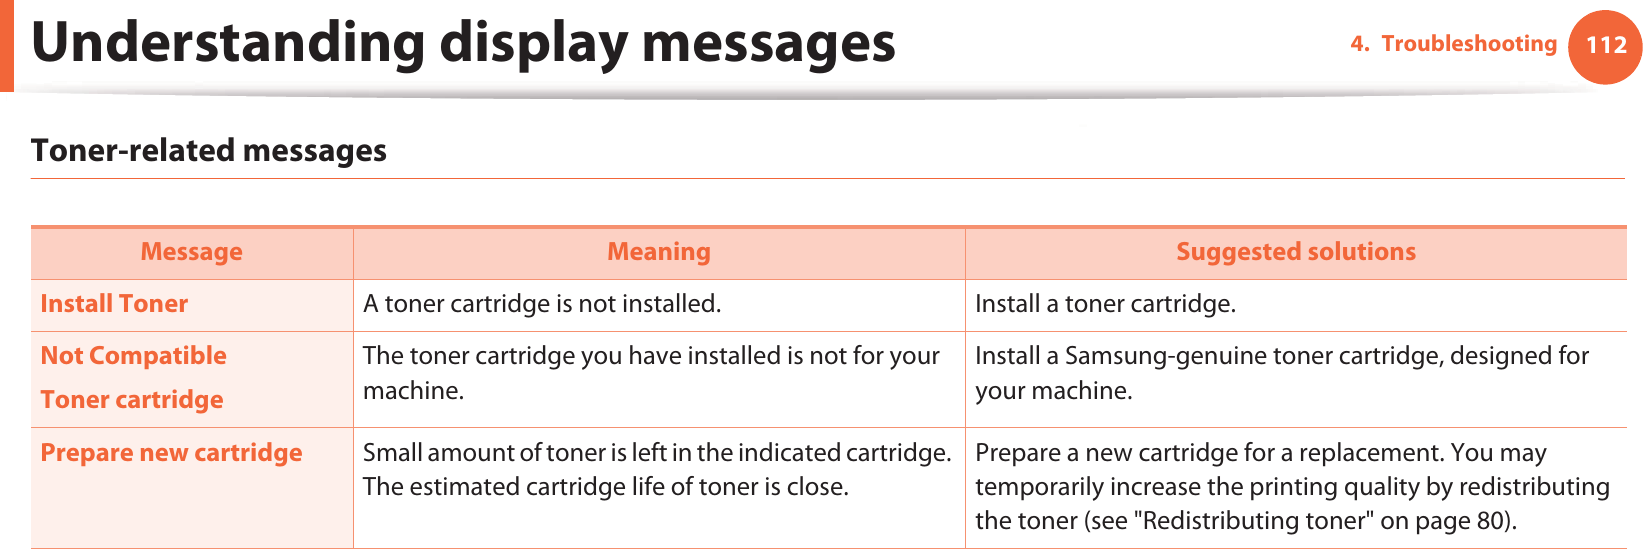 Understanding display messages 1124. TroubleshootingToner-related messages Message Meaning Suggested solutionsInstall Toner  A toner cartridge is not installed. Install a toner cartridge.Not CompatibleToner cartridgeThe toner cartridge you have installed is not for your machine.Install a Samsung-genuine toner cartridge, designed for your machine.Prepare new cartridge Small amount of toner is left in the indicated cartridge. The estimated cartridge life of toner is close.Prepare a new cartridge for a replacement. You may temporarily increase the printing quality by redistributing the toner (see &quot;Redistributing toner&quot; on page 80).